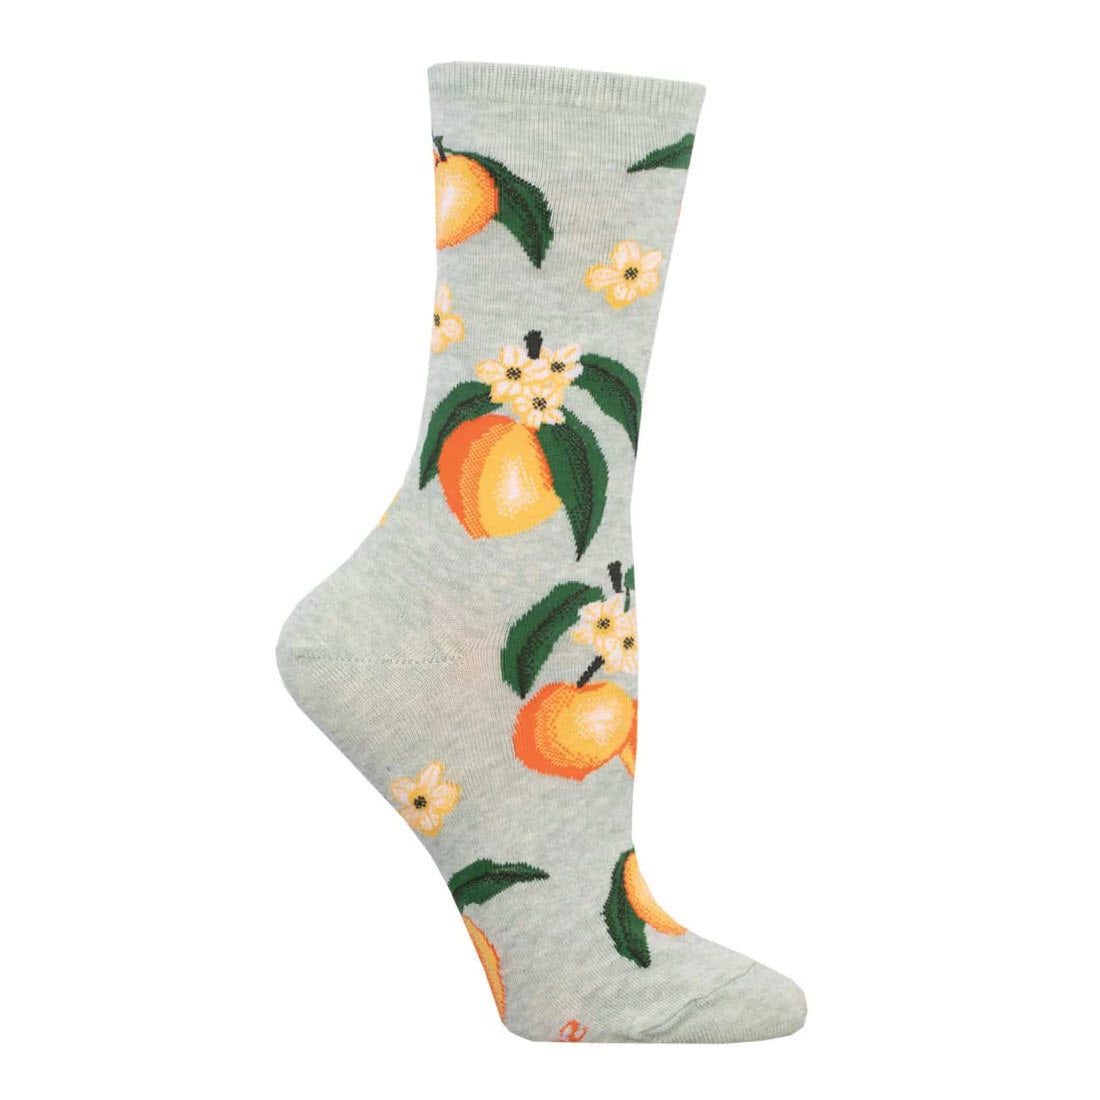 A single Socksmith Sweet Peach Crew sock with a colorful pattern of peaches and flowers on a light gray background.